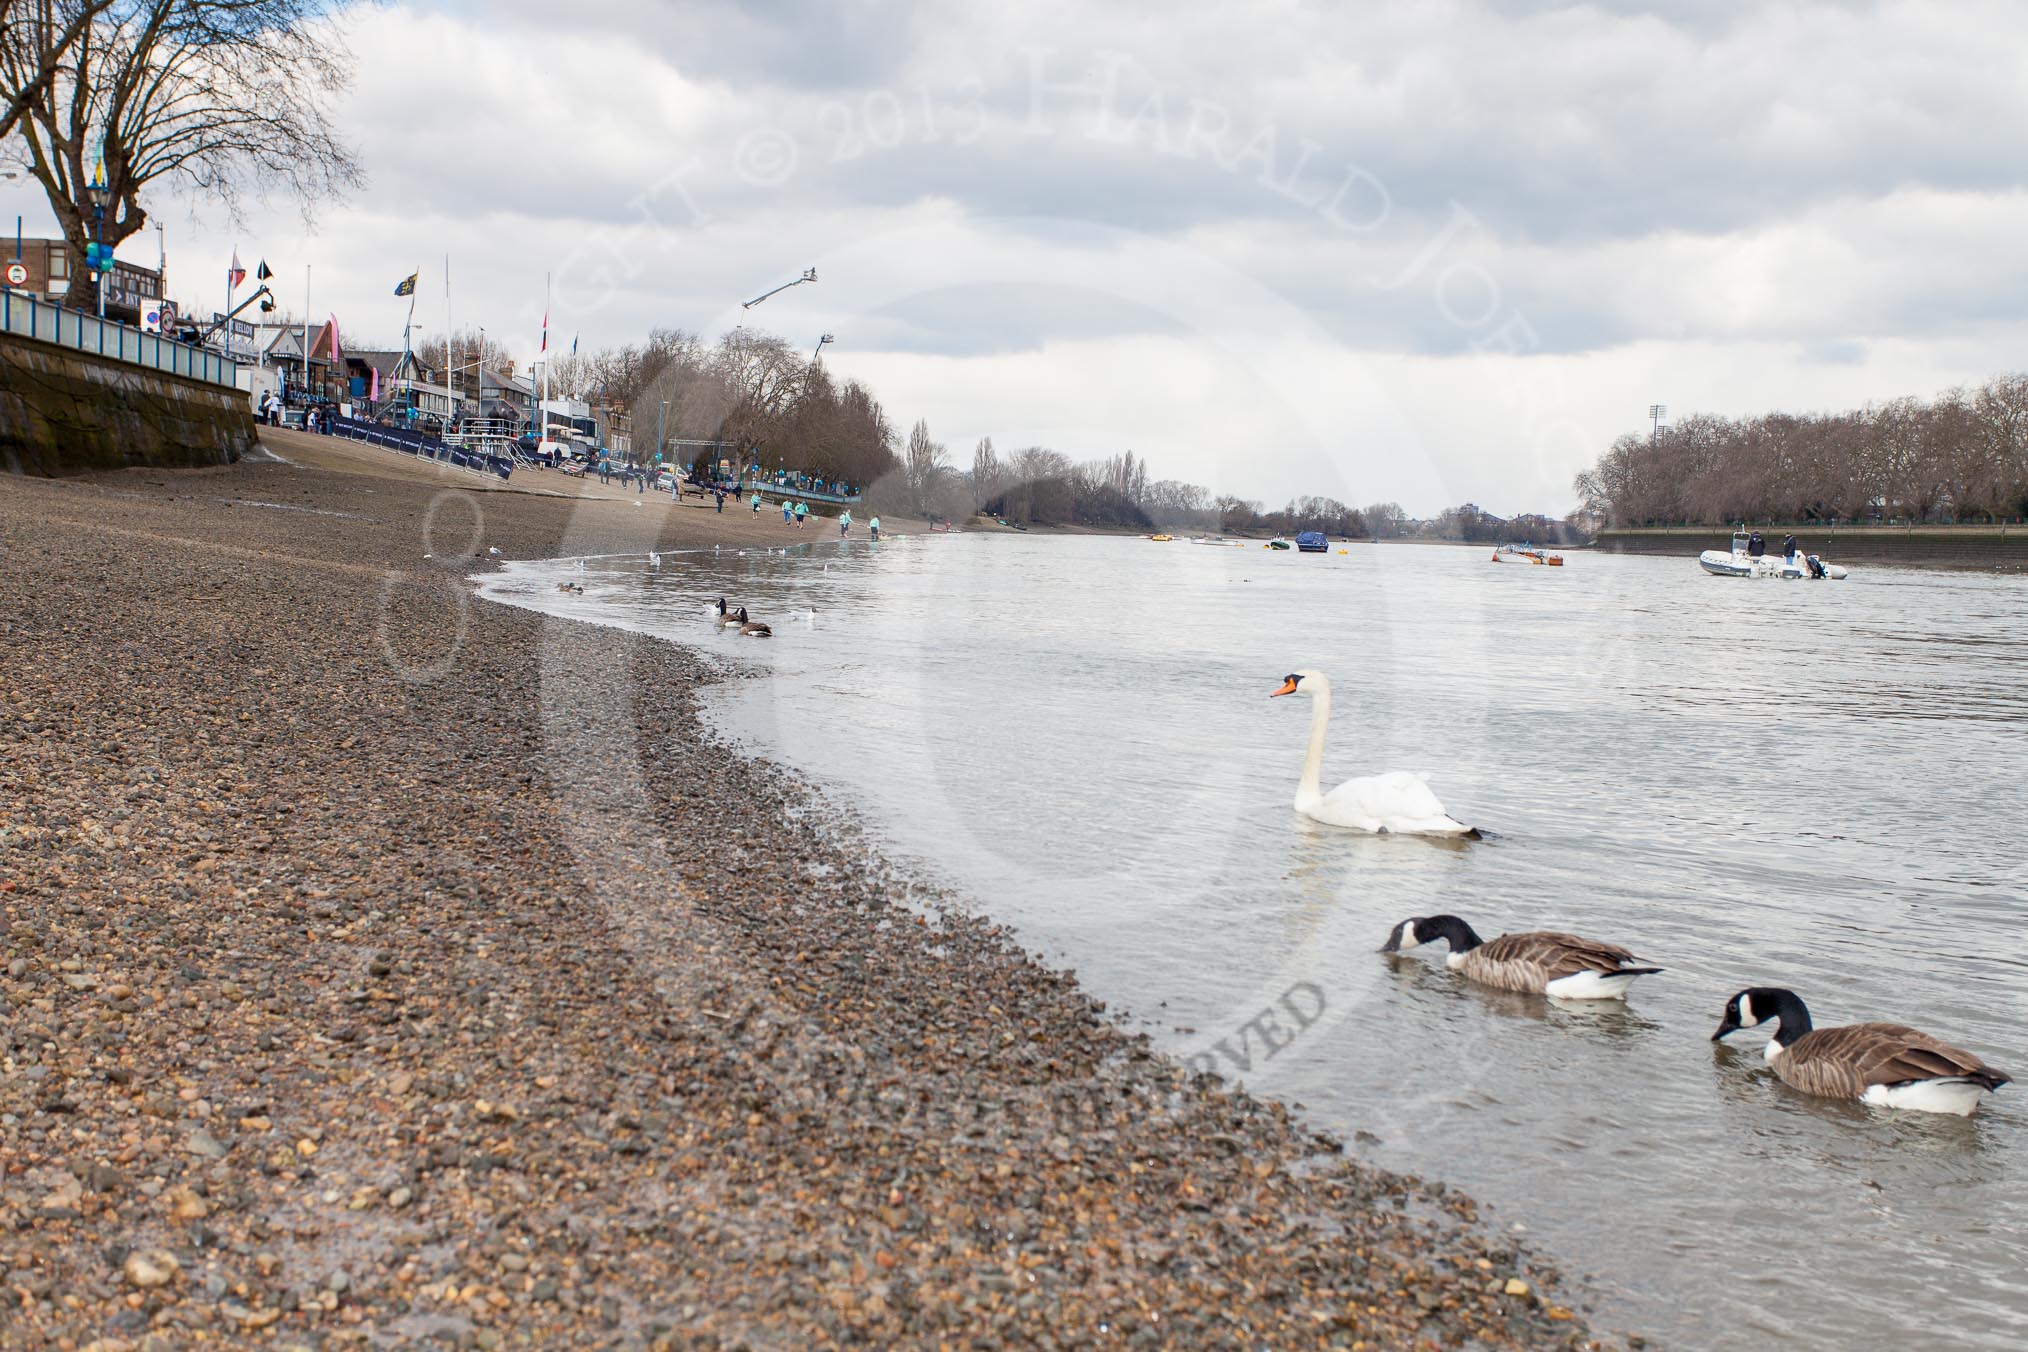 The Boat Race 2013: The River Thames at low tide, seen from near Putney Pier, on the left Putney Embankment getting ready for the 2013 Boat Race..
Putney,
London SW15,

United Kingdom,
on 31 March 2013 at 11:17, image #13